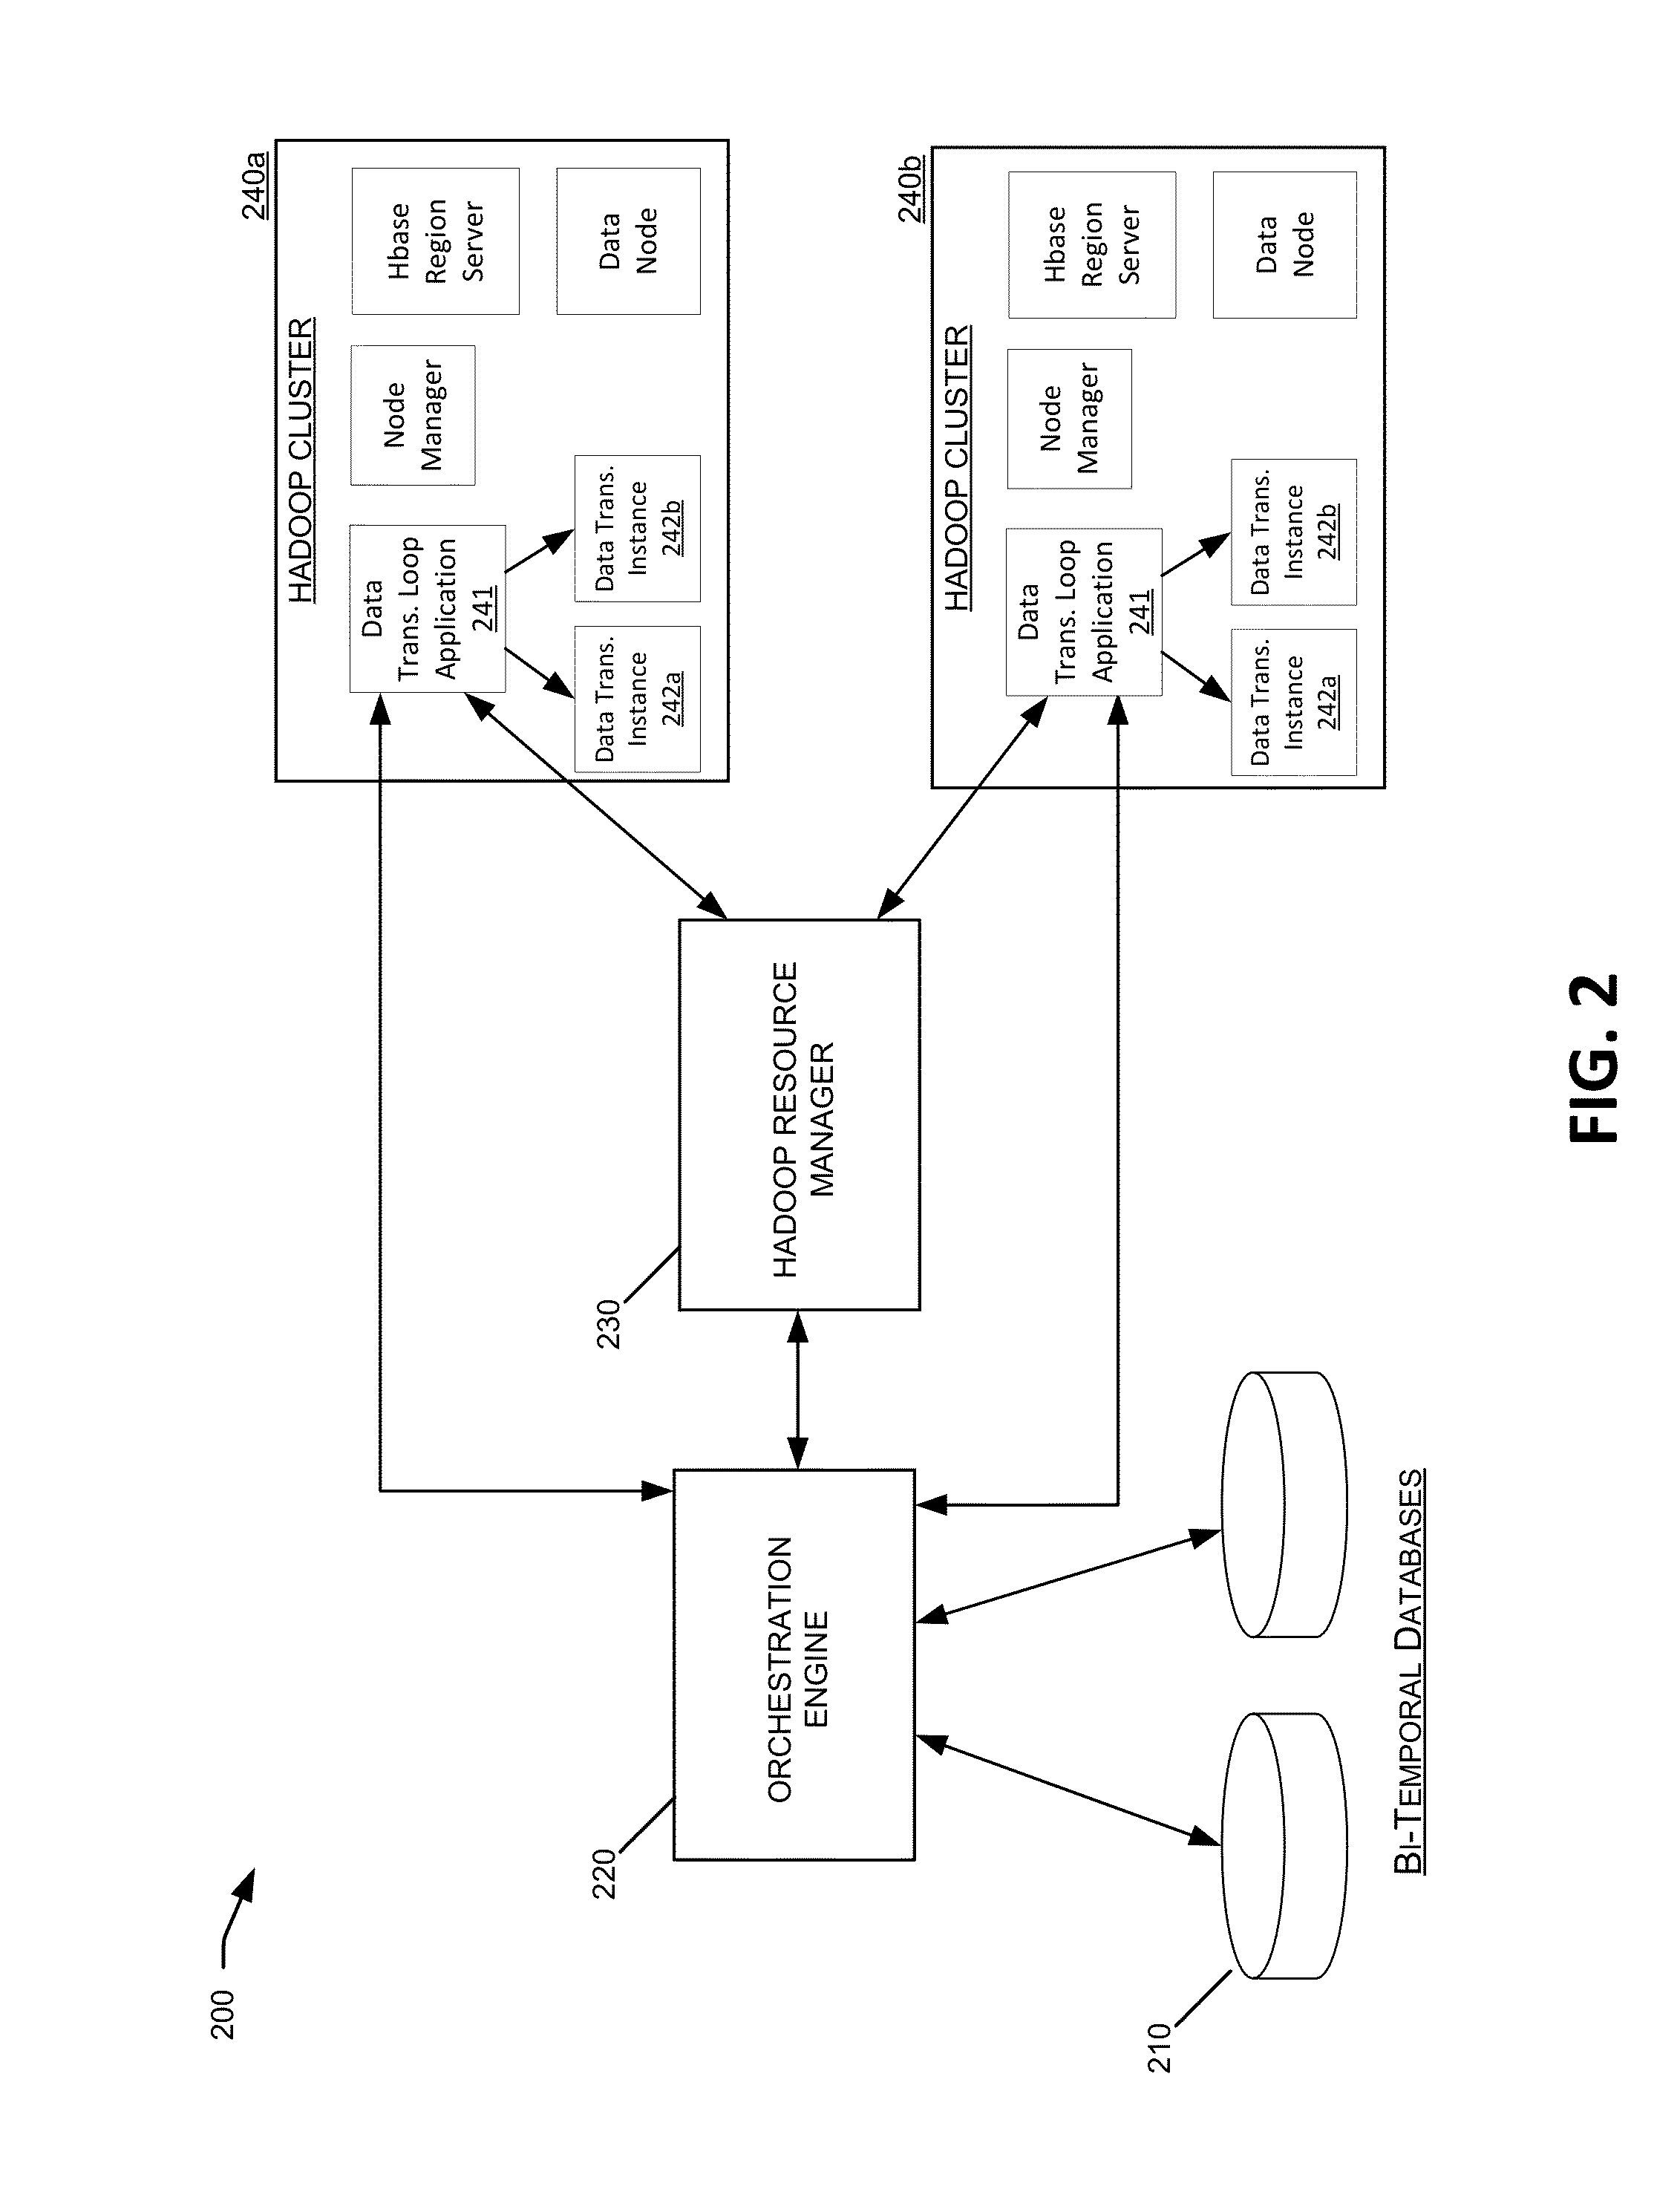 Knowledge-intensive data processing system